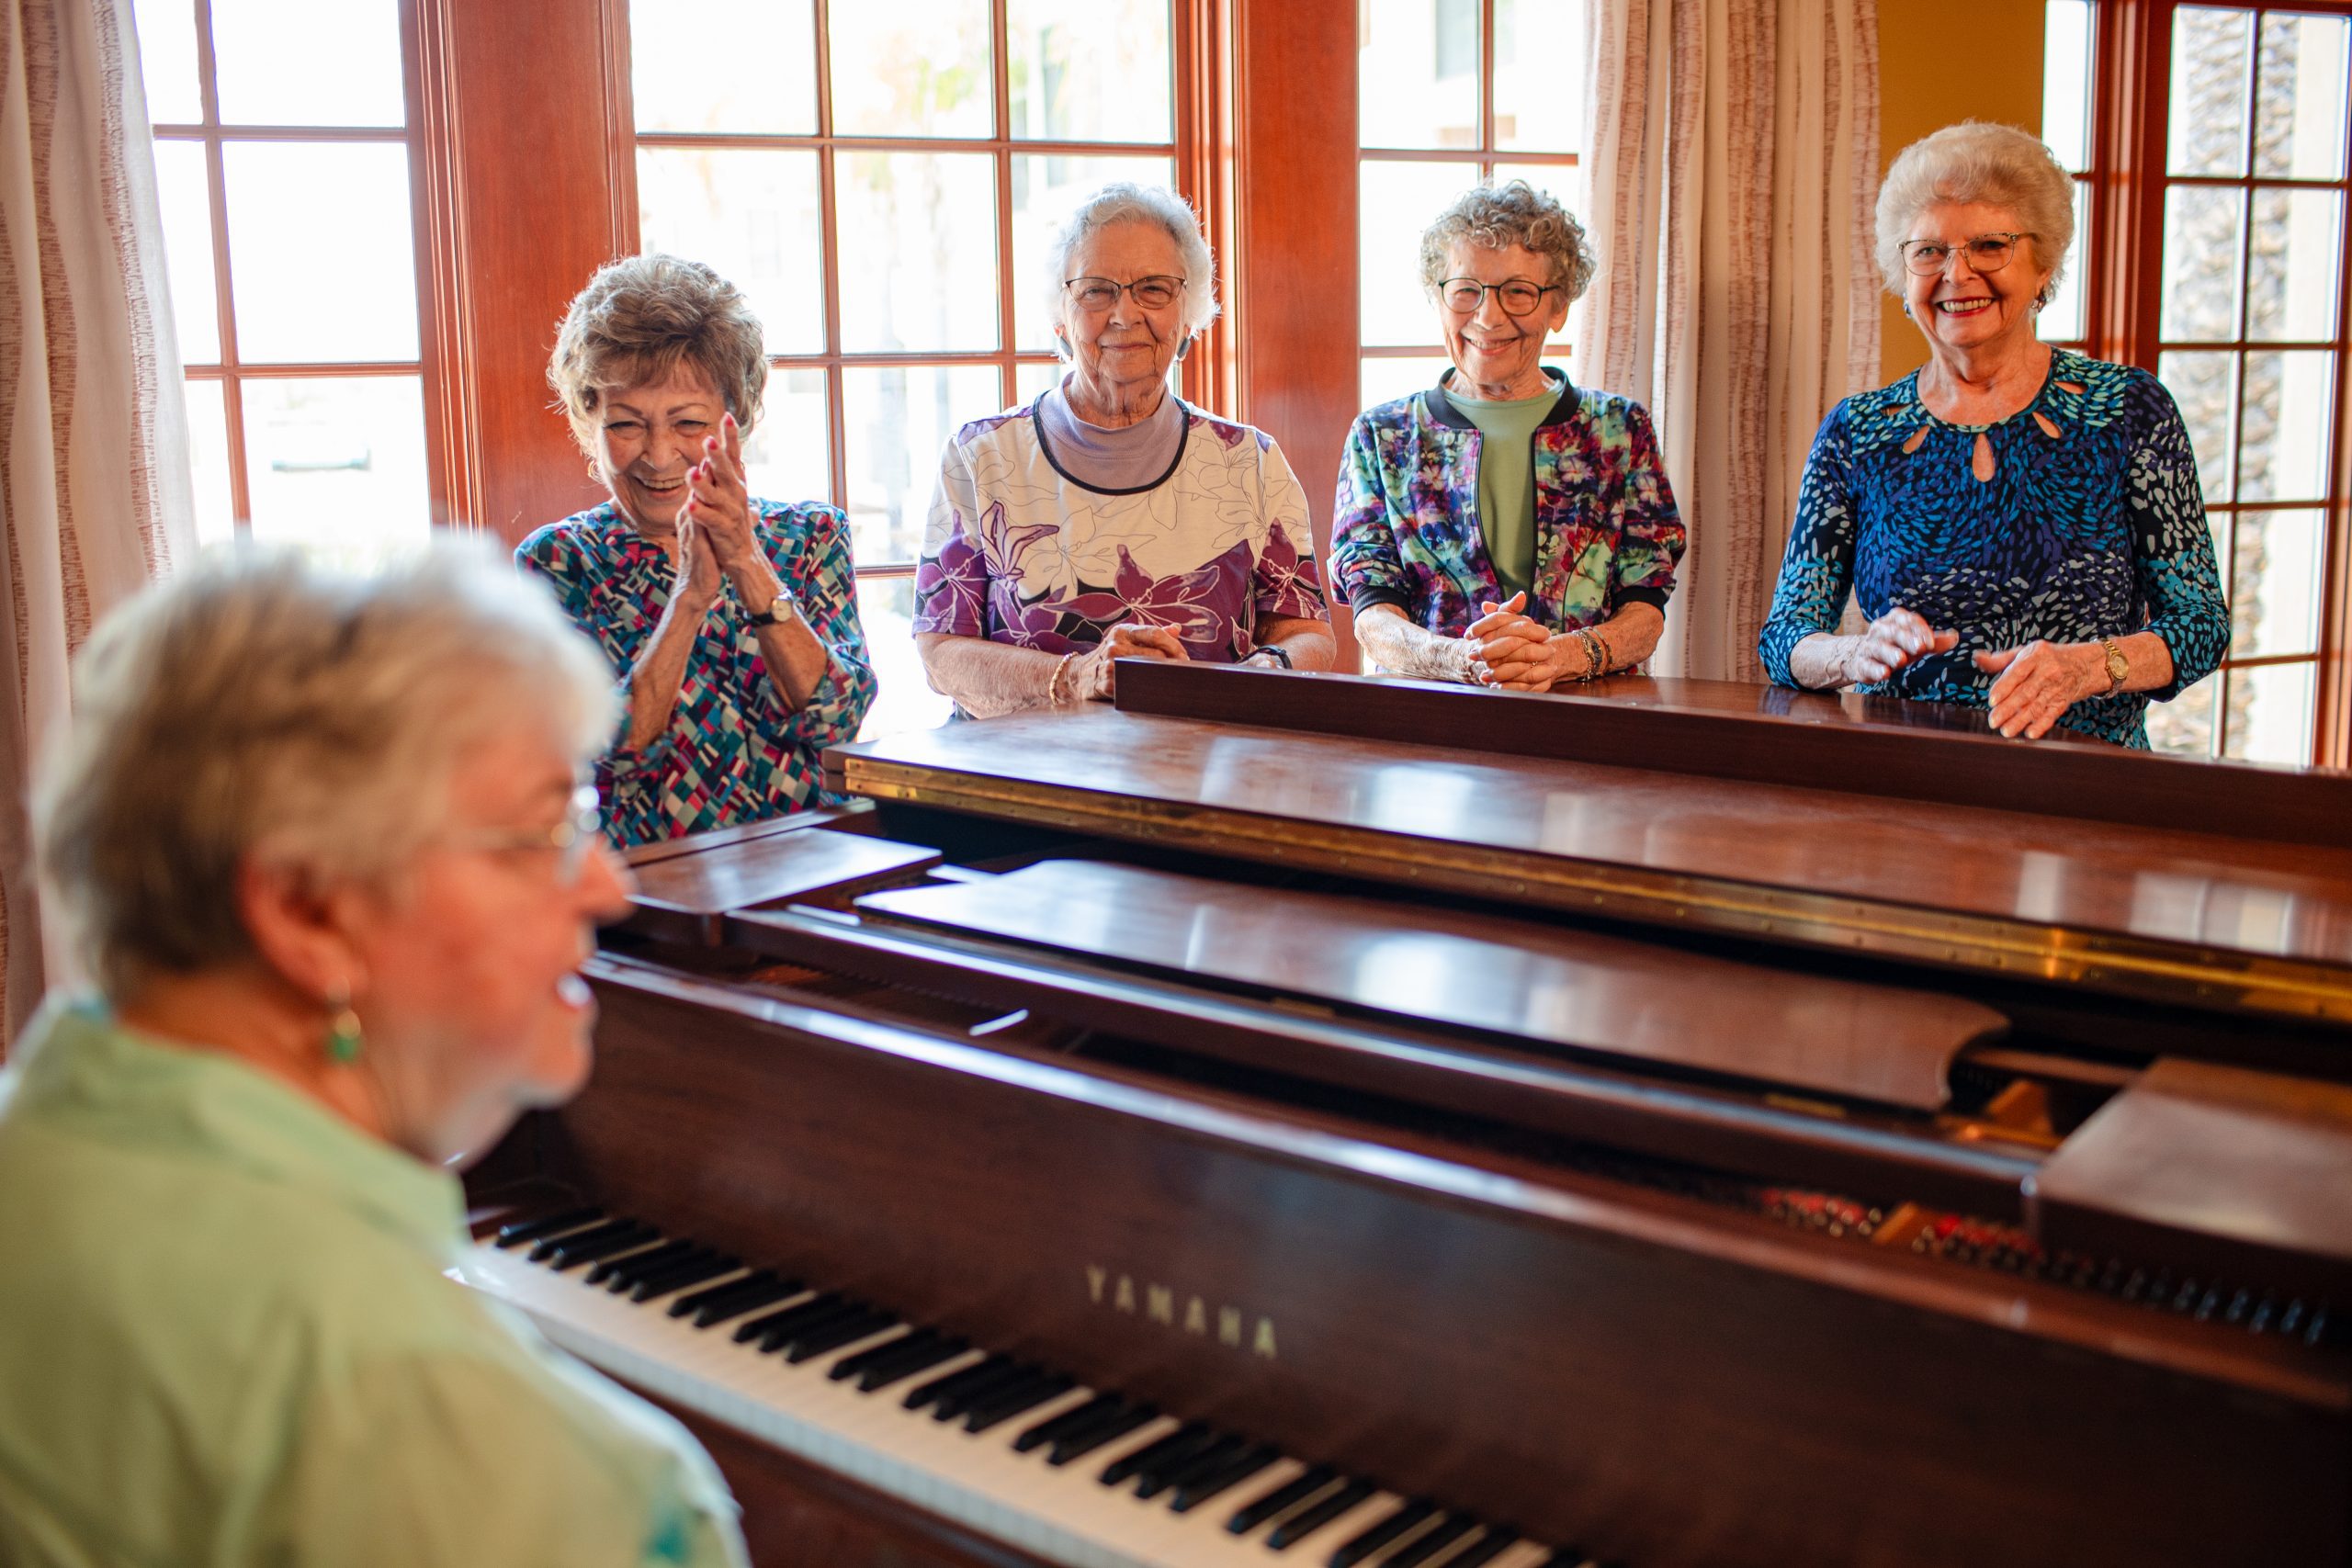 A group of elderly women joyfully playing the piano together.